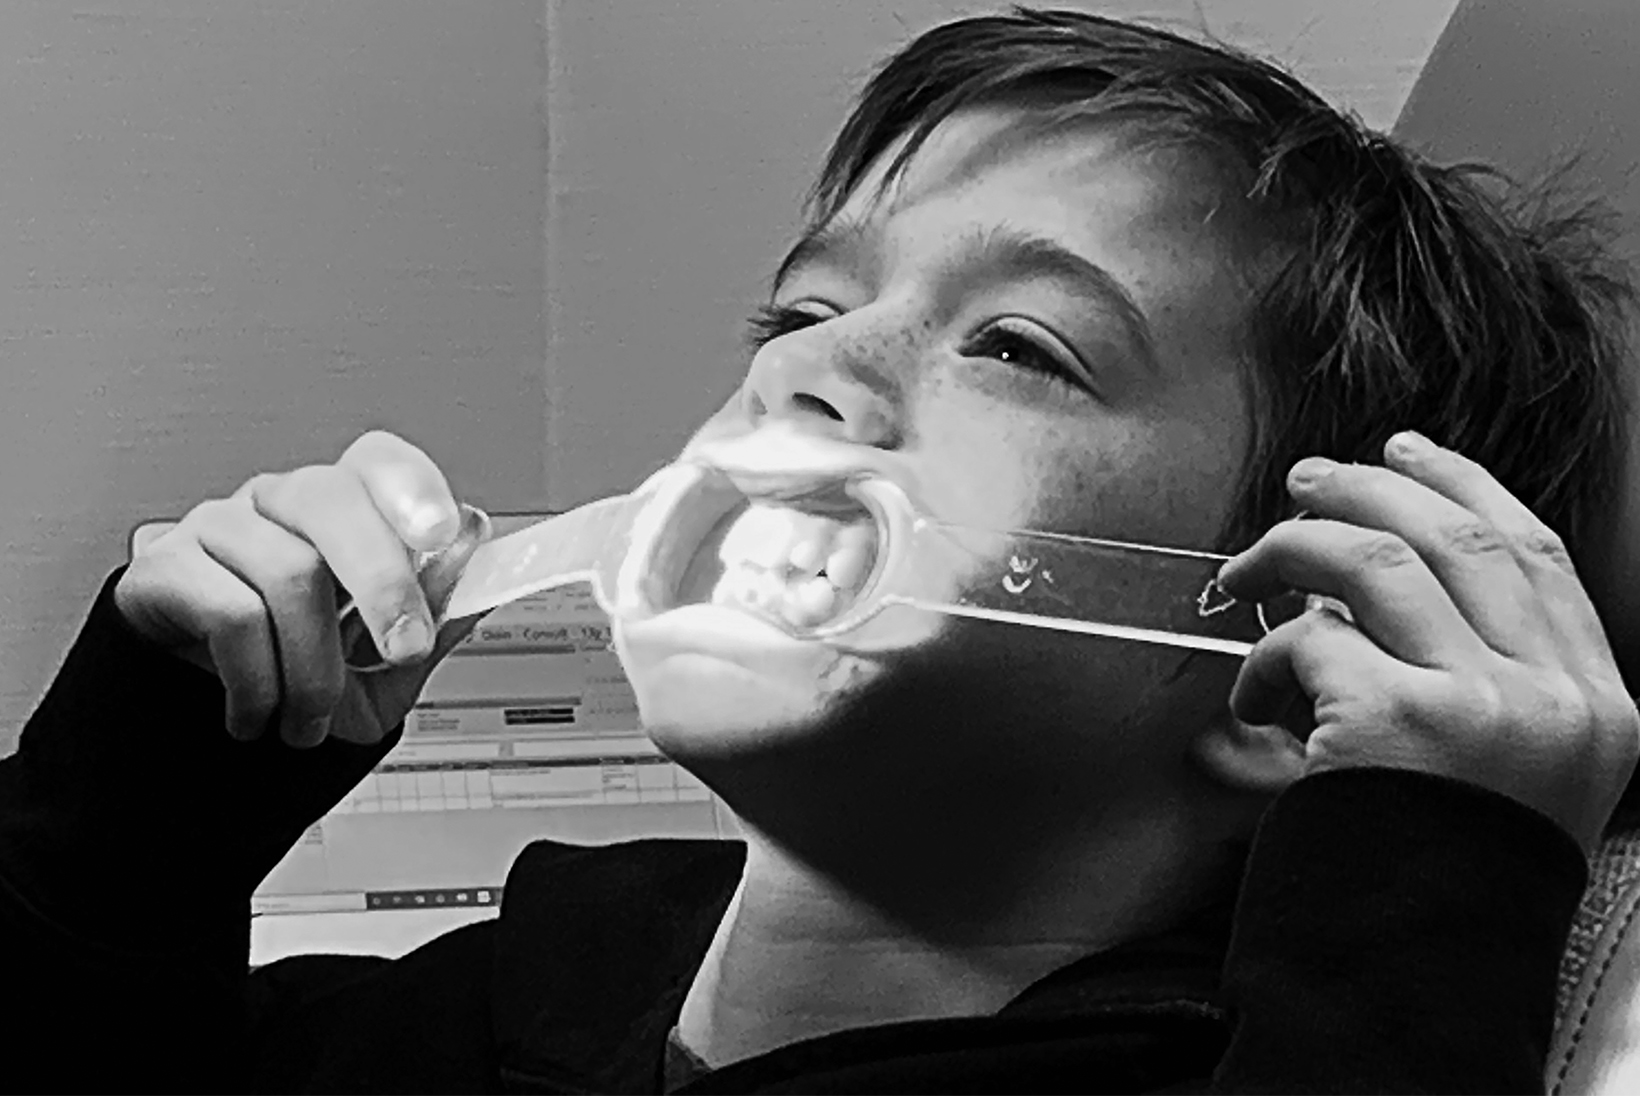 A close-up of a young boy with freckles in a dentist chair. He has a dental mouth opener in his mouth and is holding the sides with his hands.